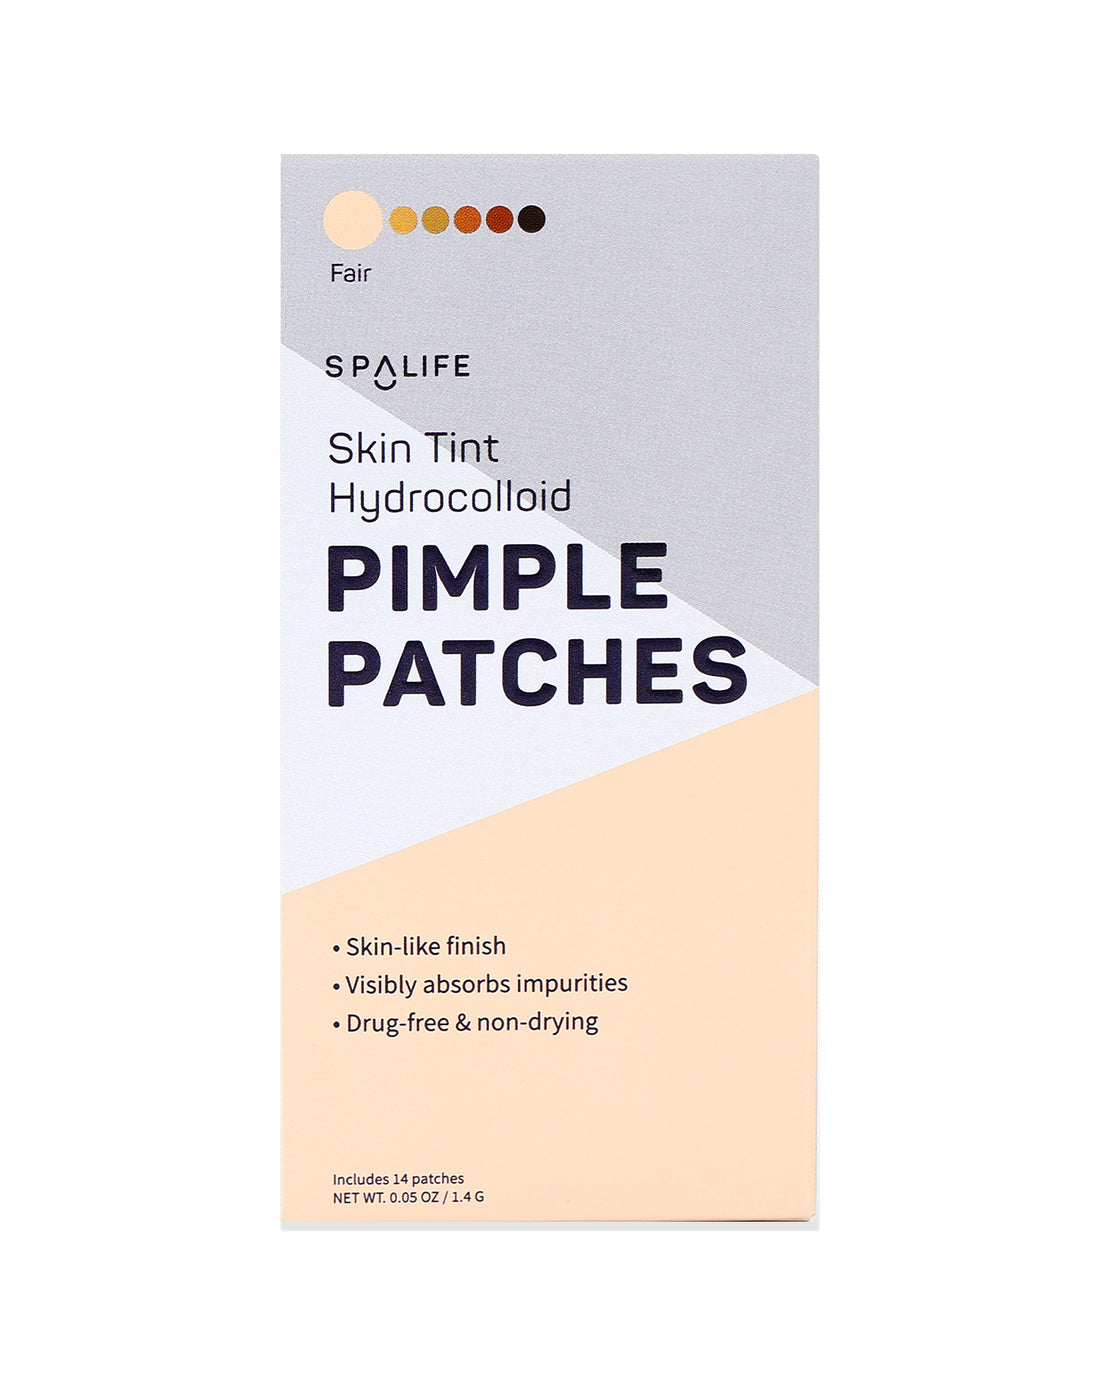 Skin_tint_pimple_patches_packe-631